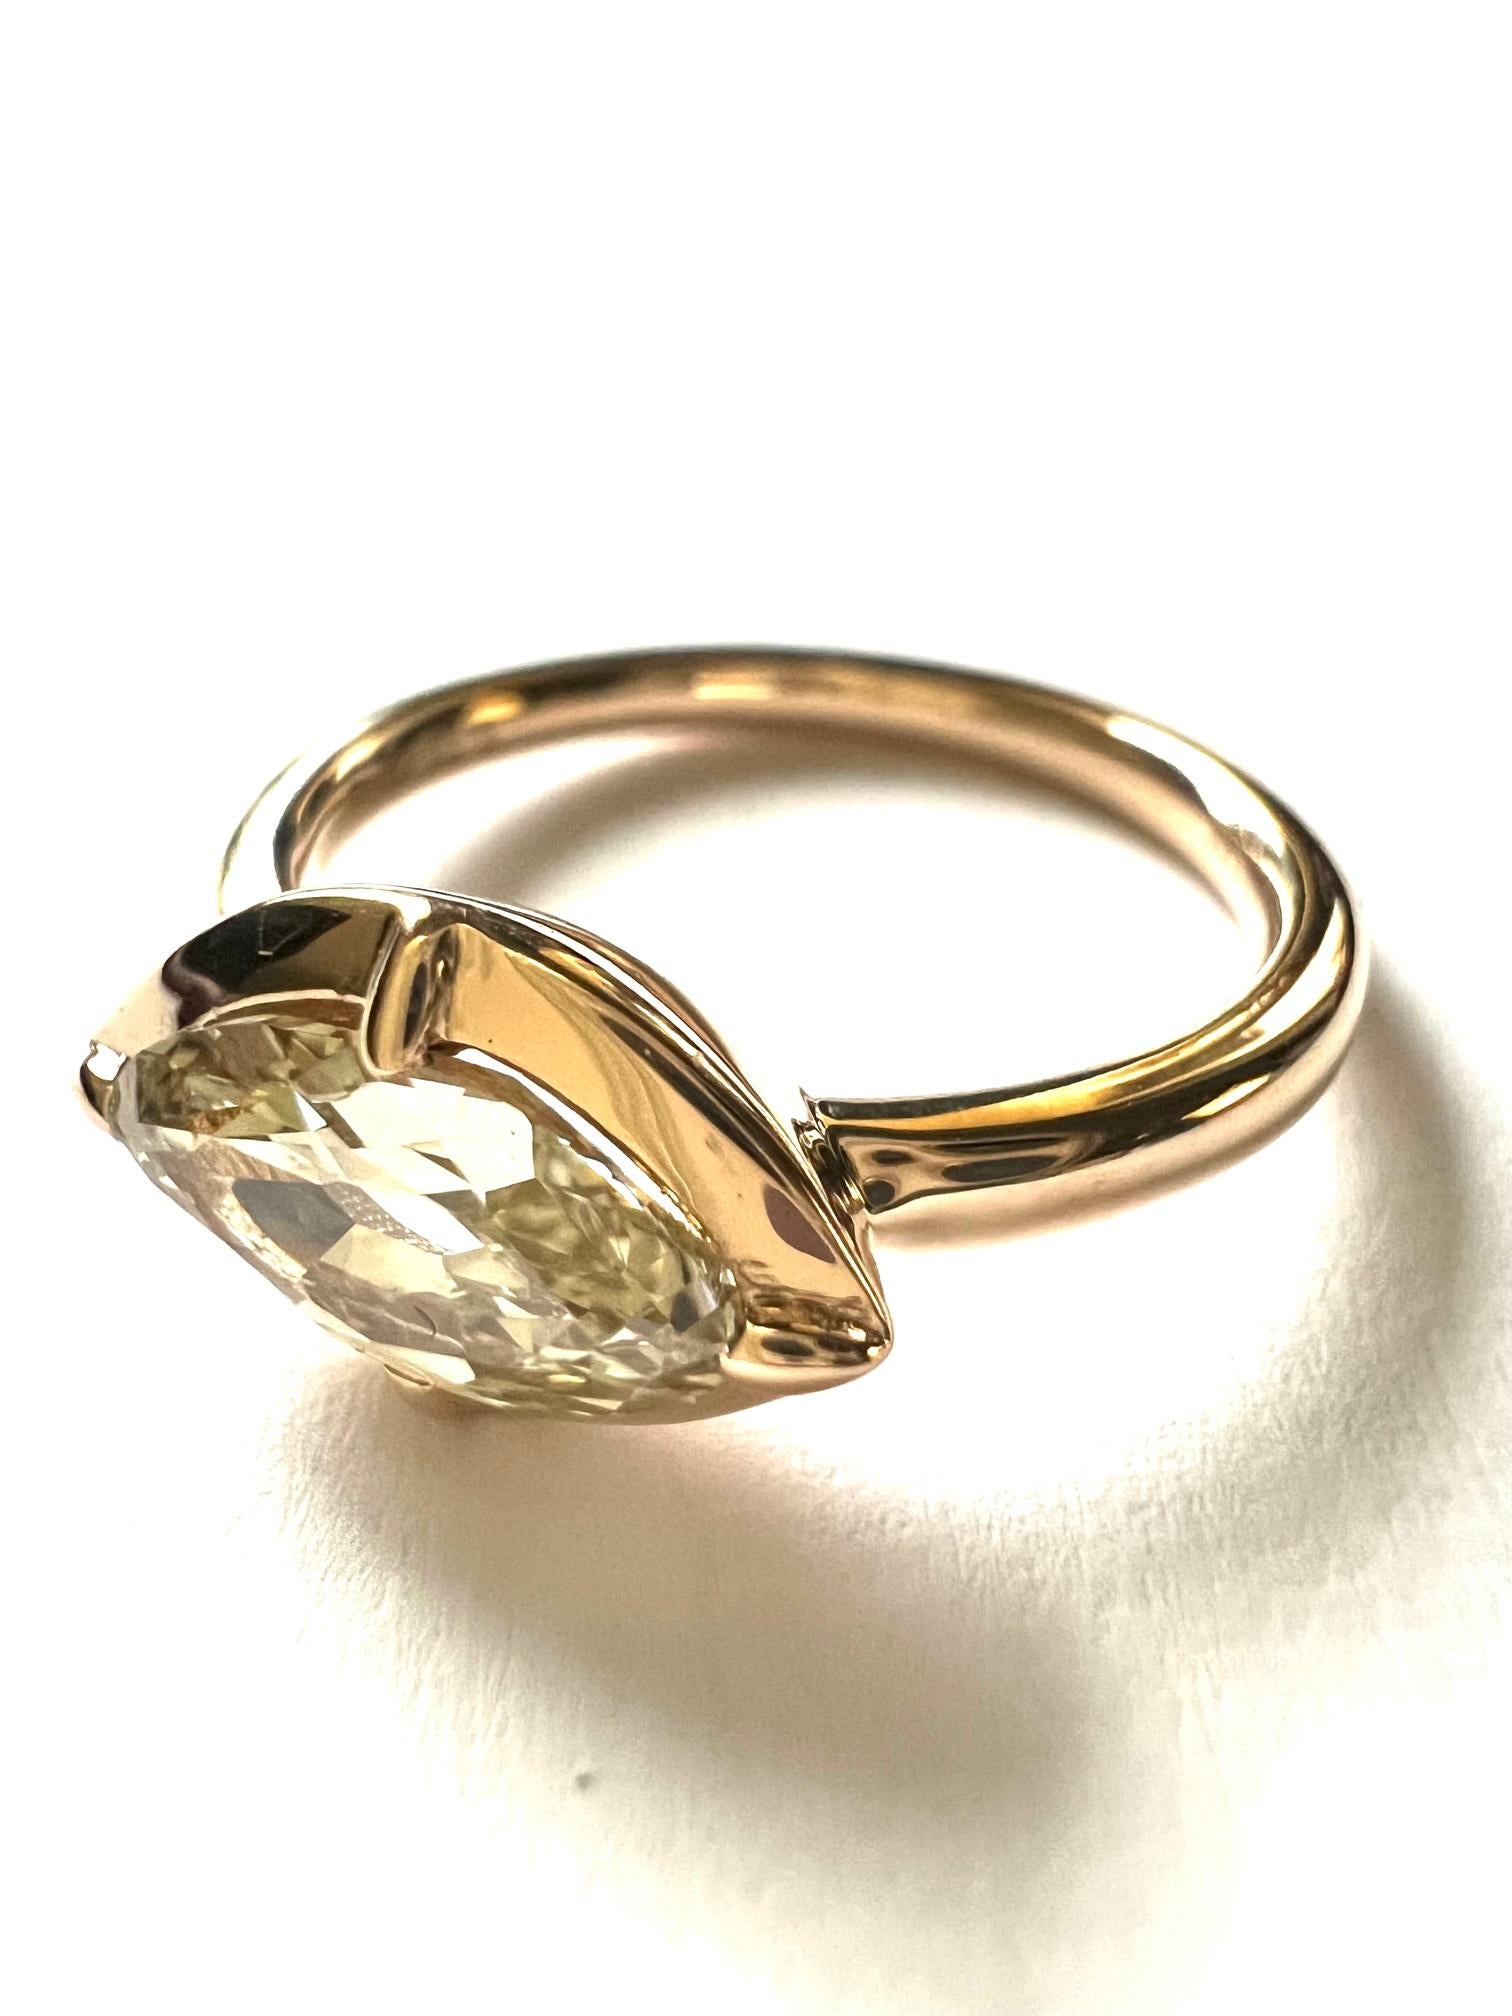 Ring in 750/ Red Gold (4.5 gram), set with 1x Diamond (LY/ VS2, Marquise-cut,  1.09cts)

Beautiful antique inspired stone with a golden/honey colored tone. The stone looks much larger than its carat weight would suggest and it has a very nice price